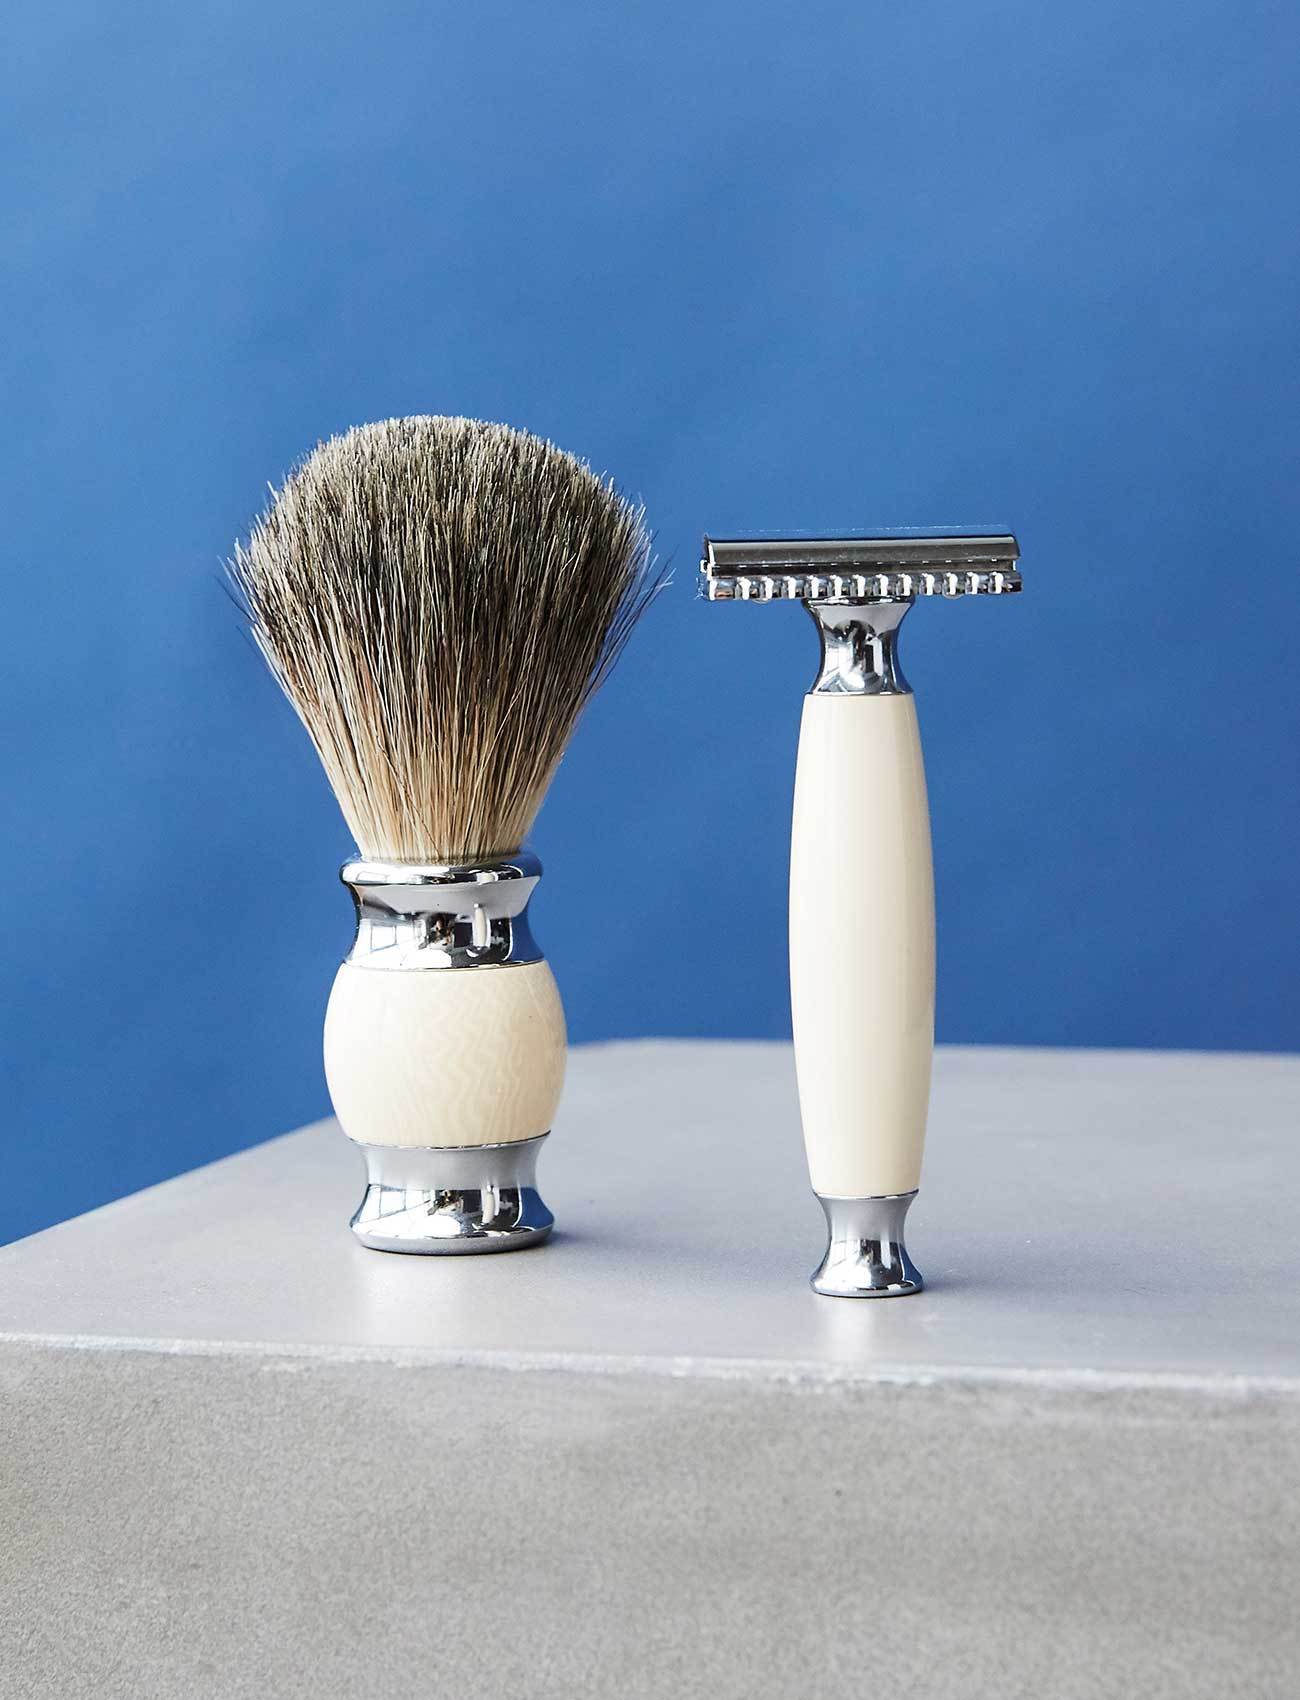 A FEW SIMPLE RULES FOR THE PERFECT SHAVE